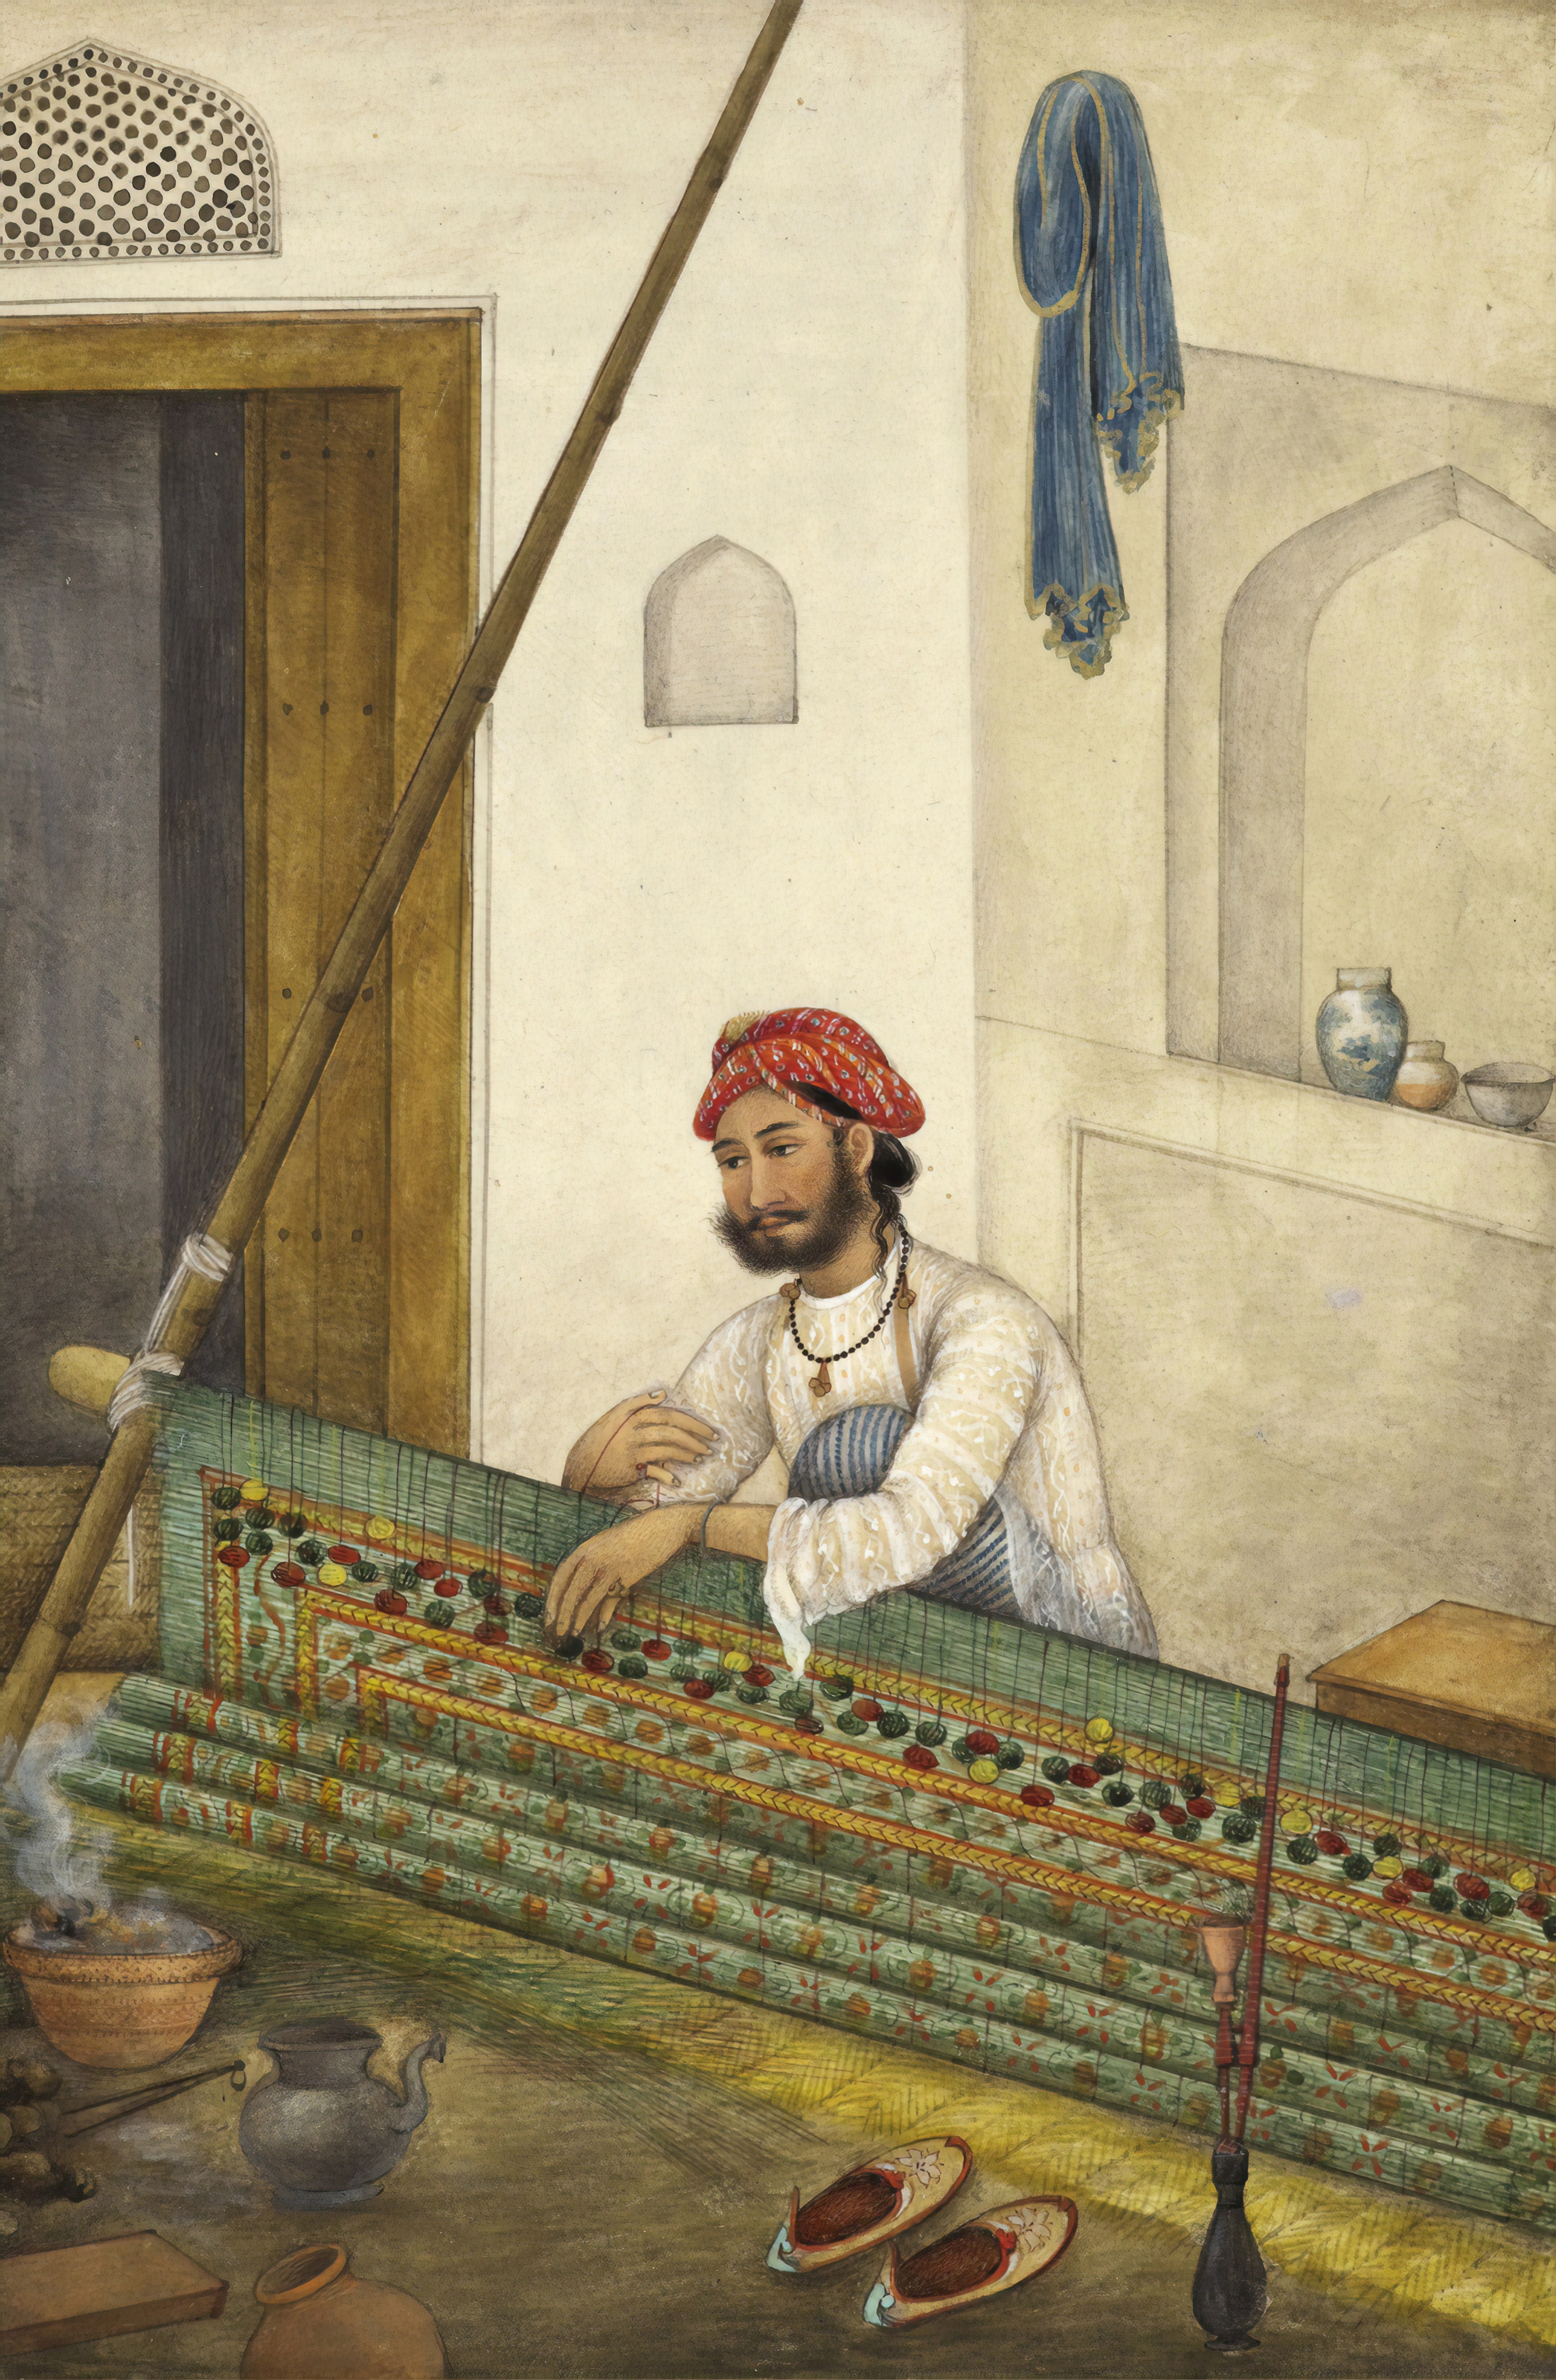 Indian weaver - image from the British Library